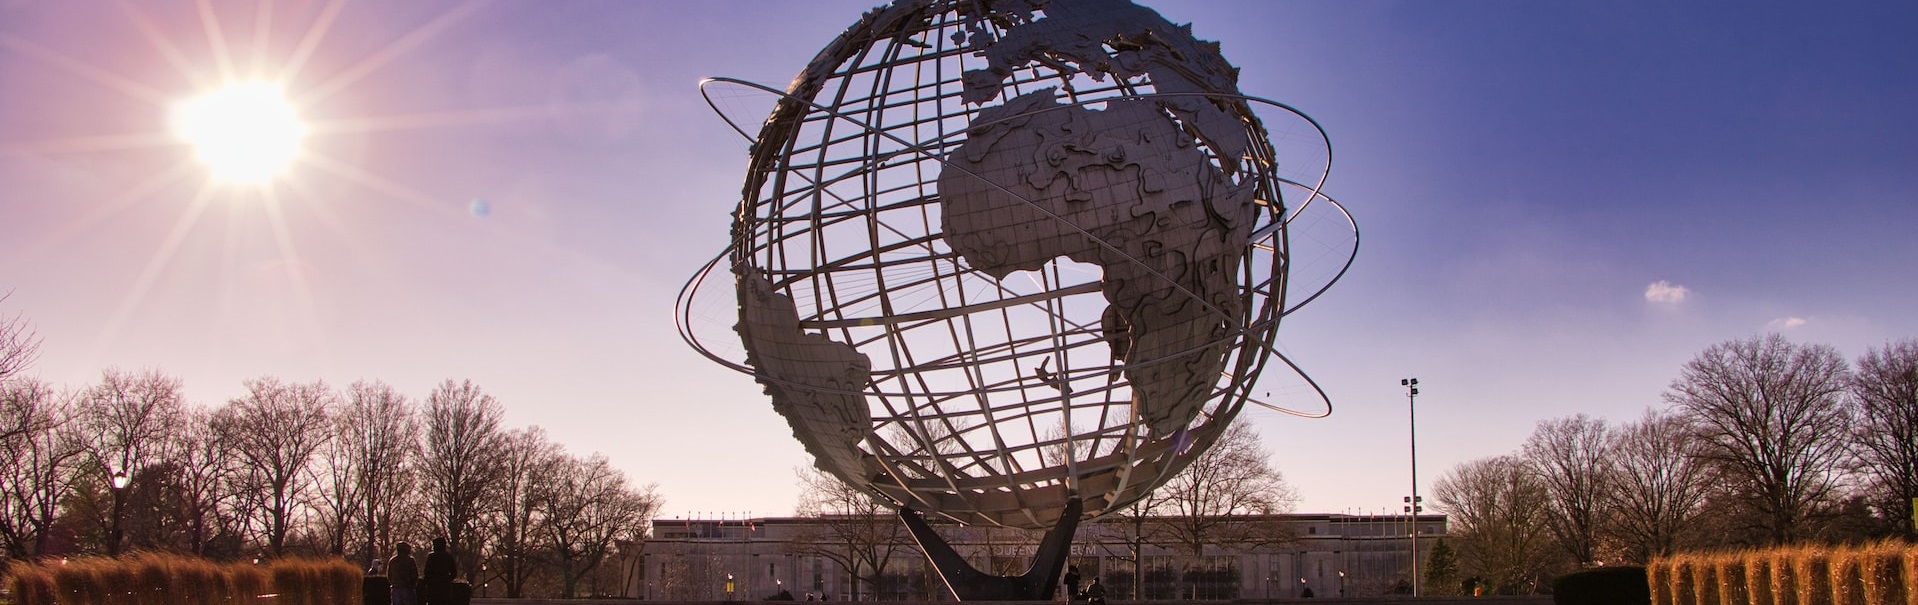 Globe Sculpture in queens | Breast Cancer Car Donations